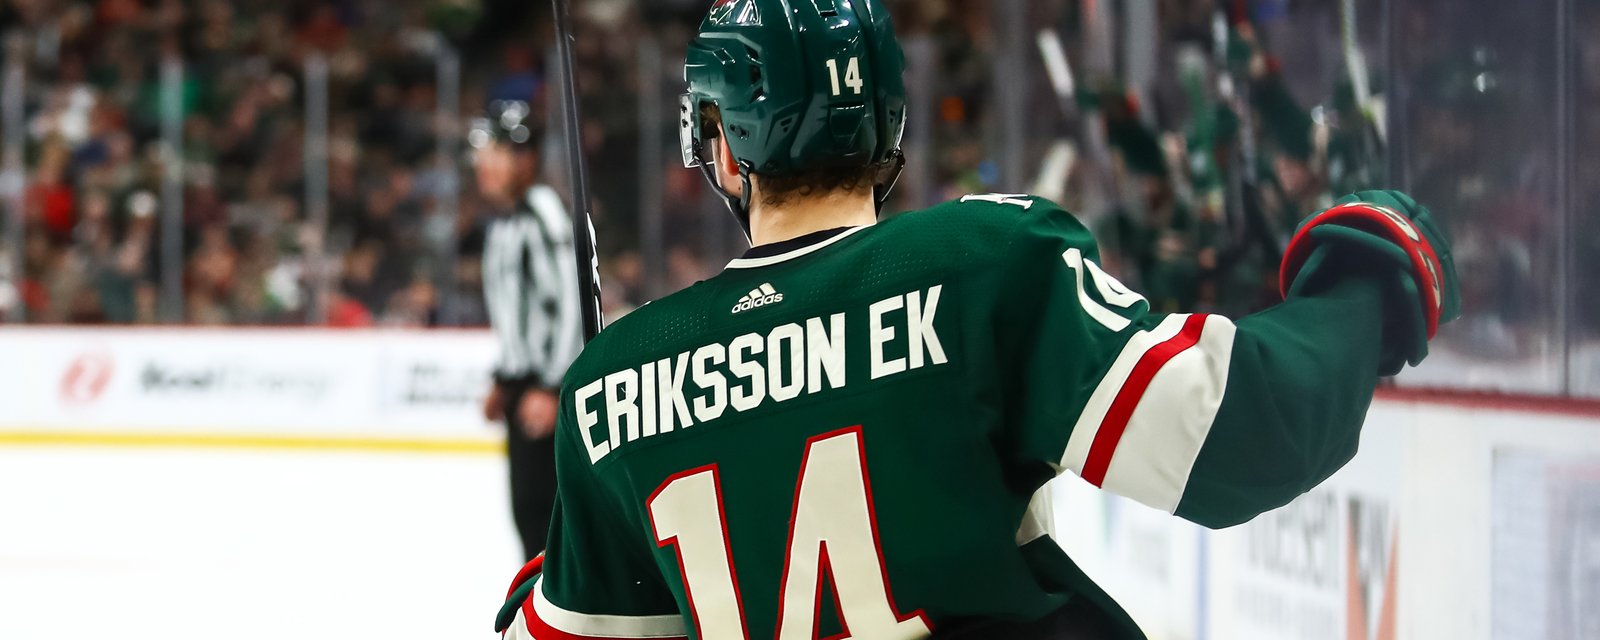 Wild sign Eriksson Ek to monster 8-year contract! 